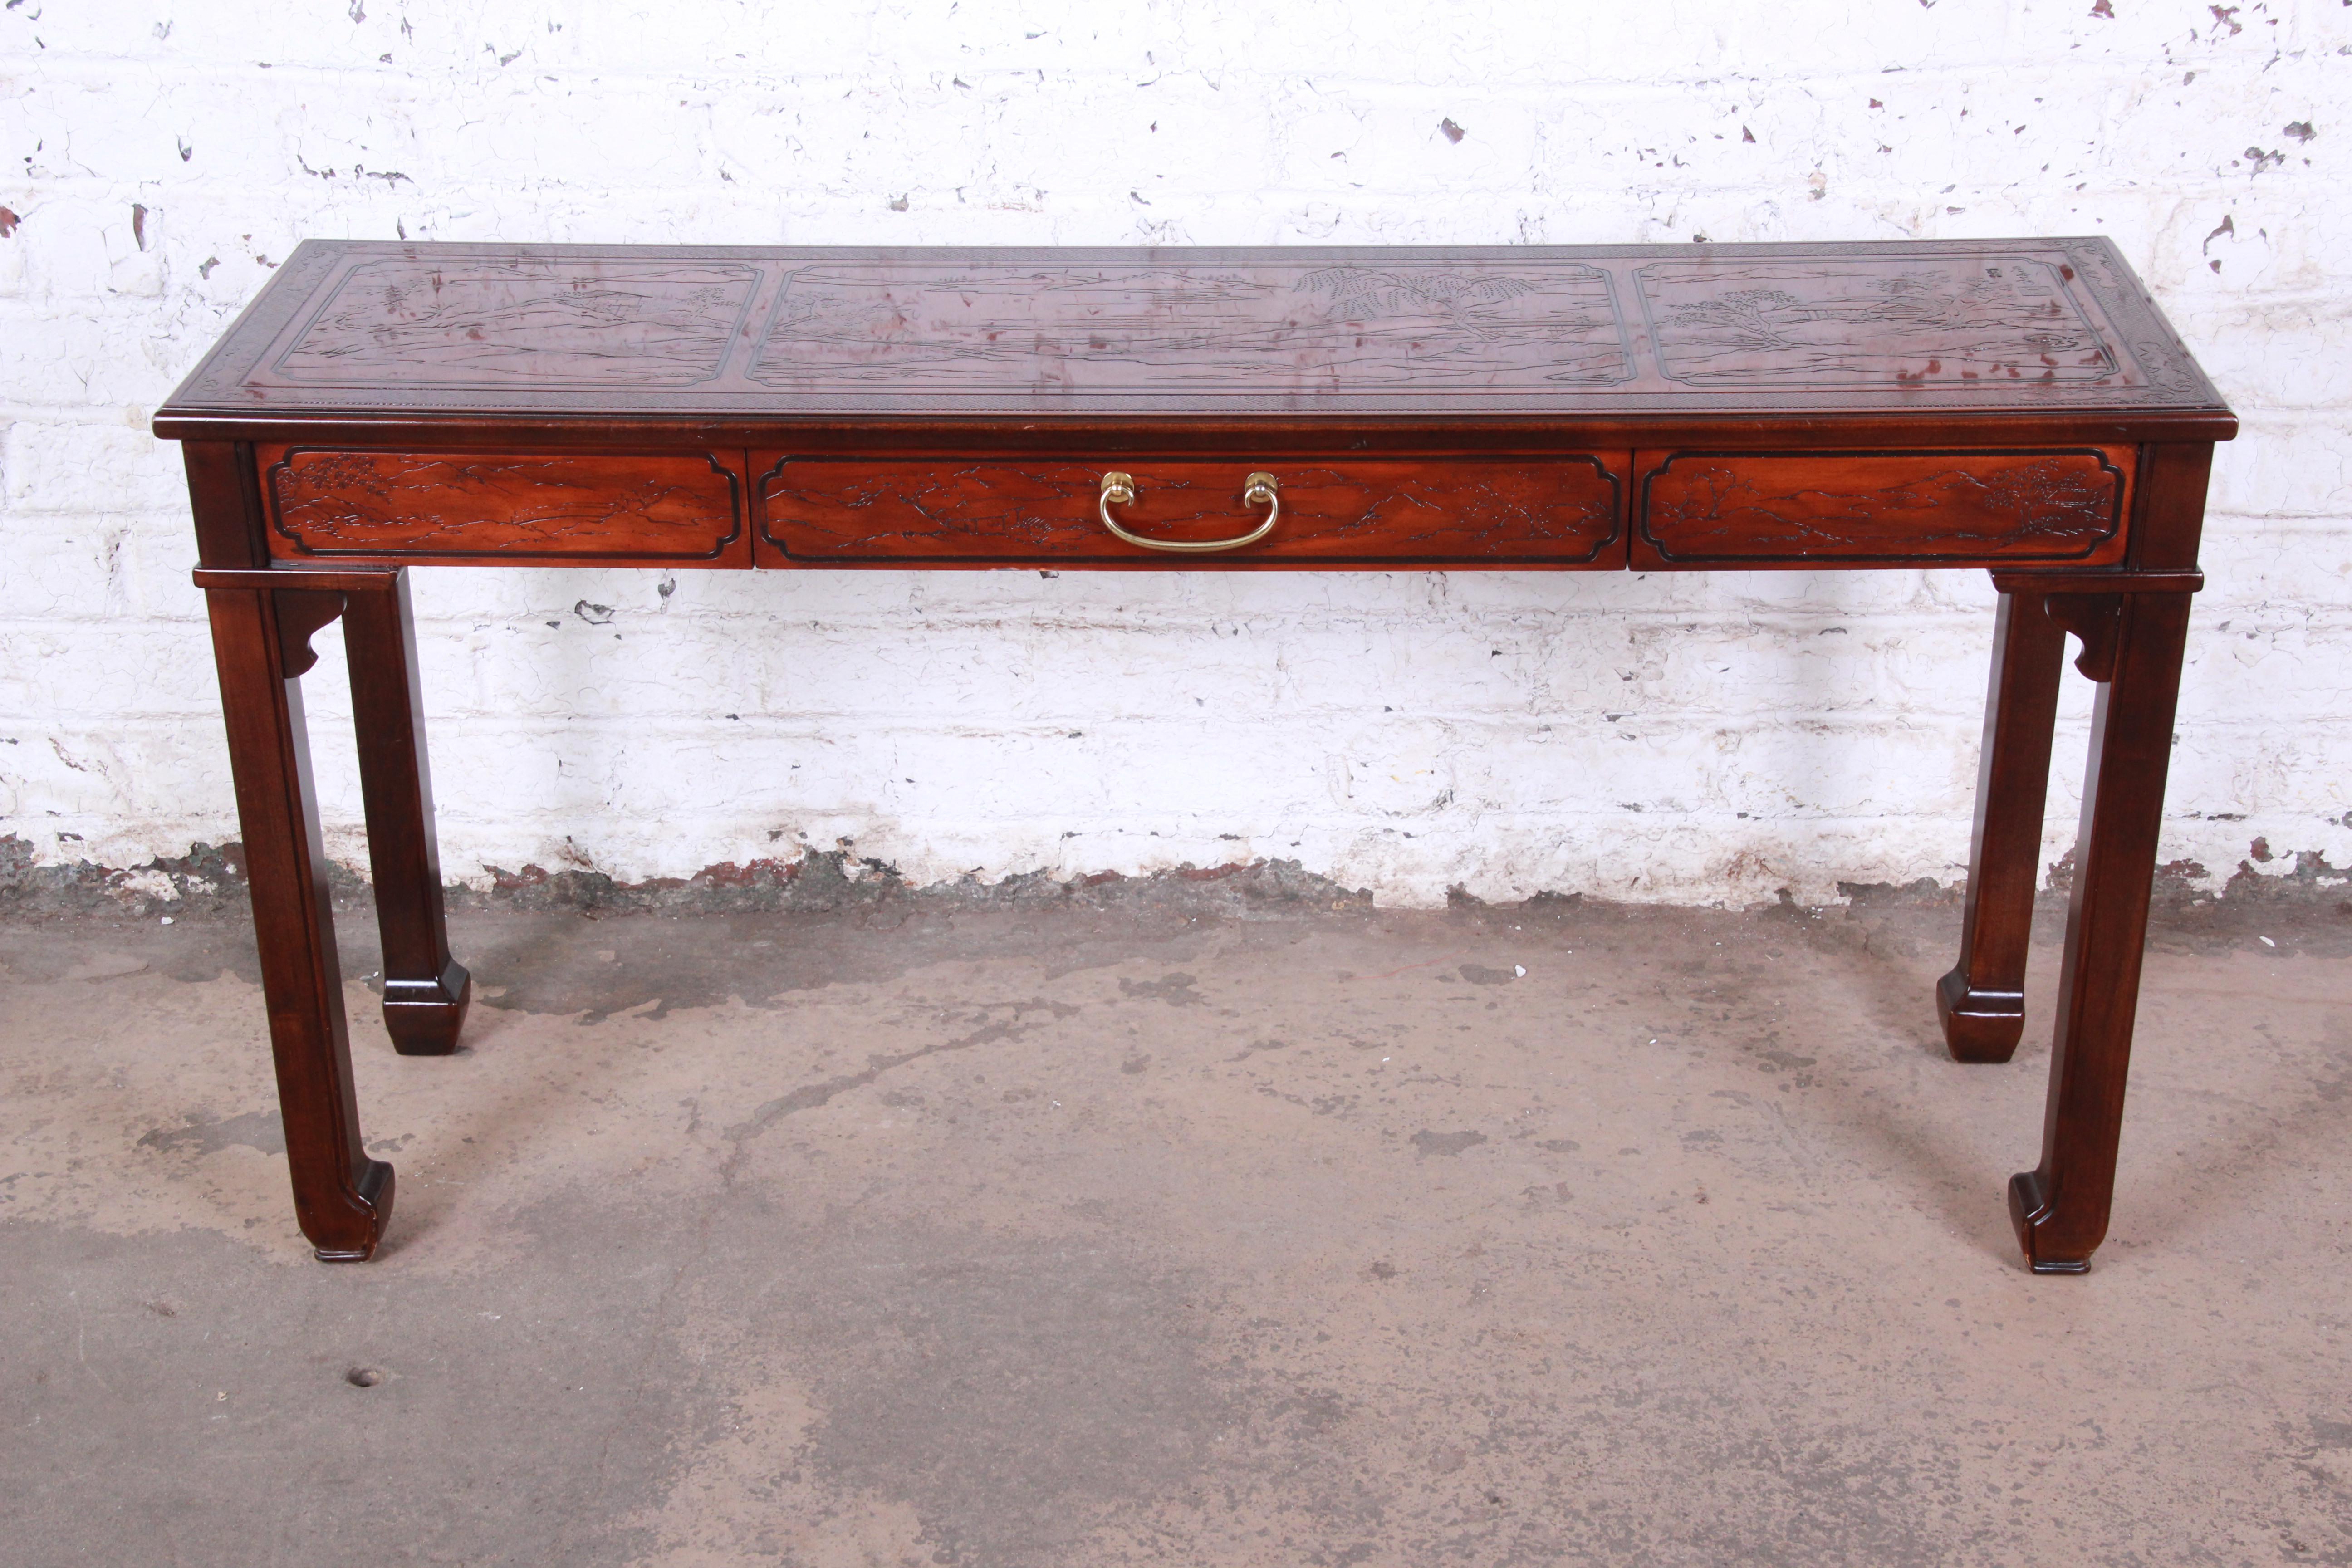 An exceptional Hollywood Regency Chinoiserie console or sofa table from the Conoisseur line by Drexel Heritage. The table features beautiful mahogany wood grain and unique carved Asian details with nature scenes. It has a single drawer with original